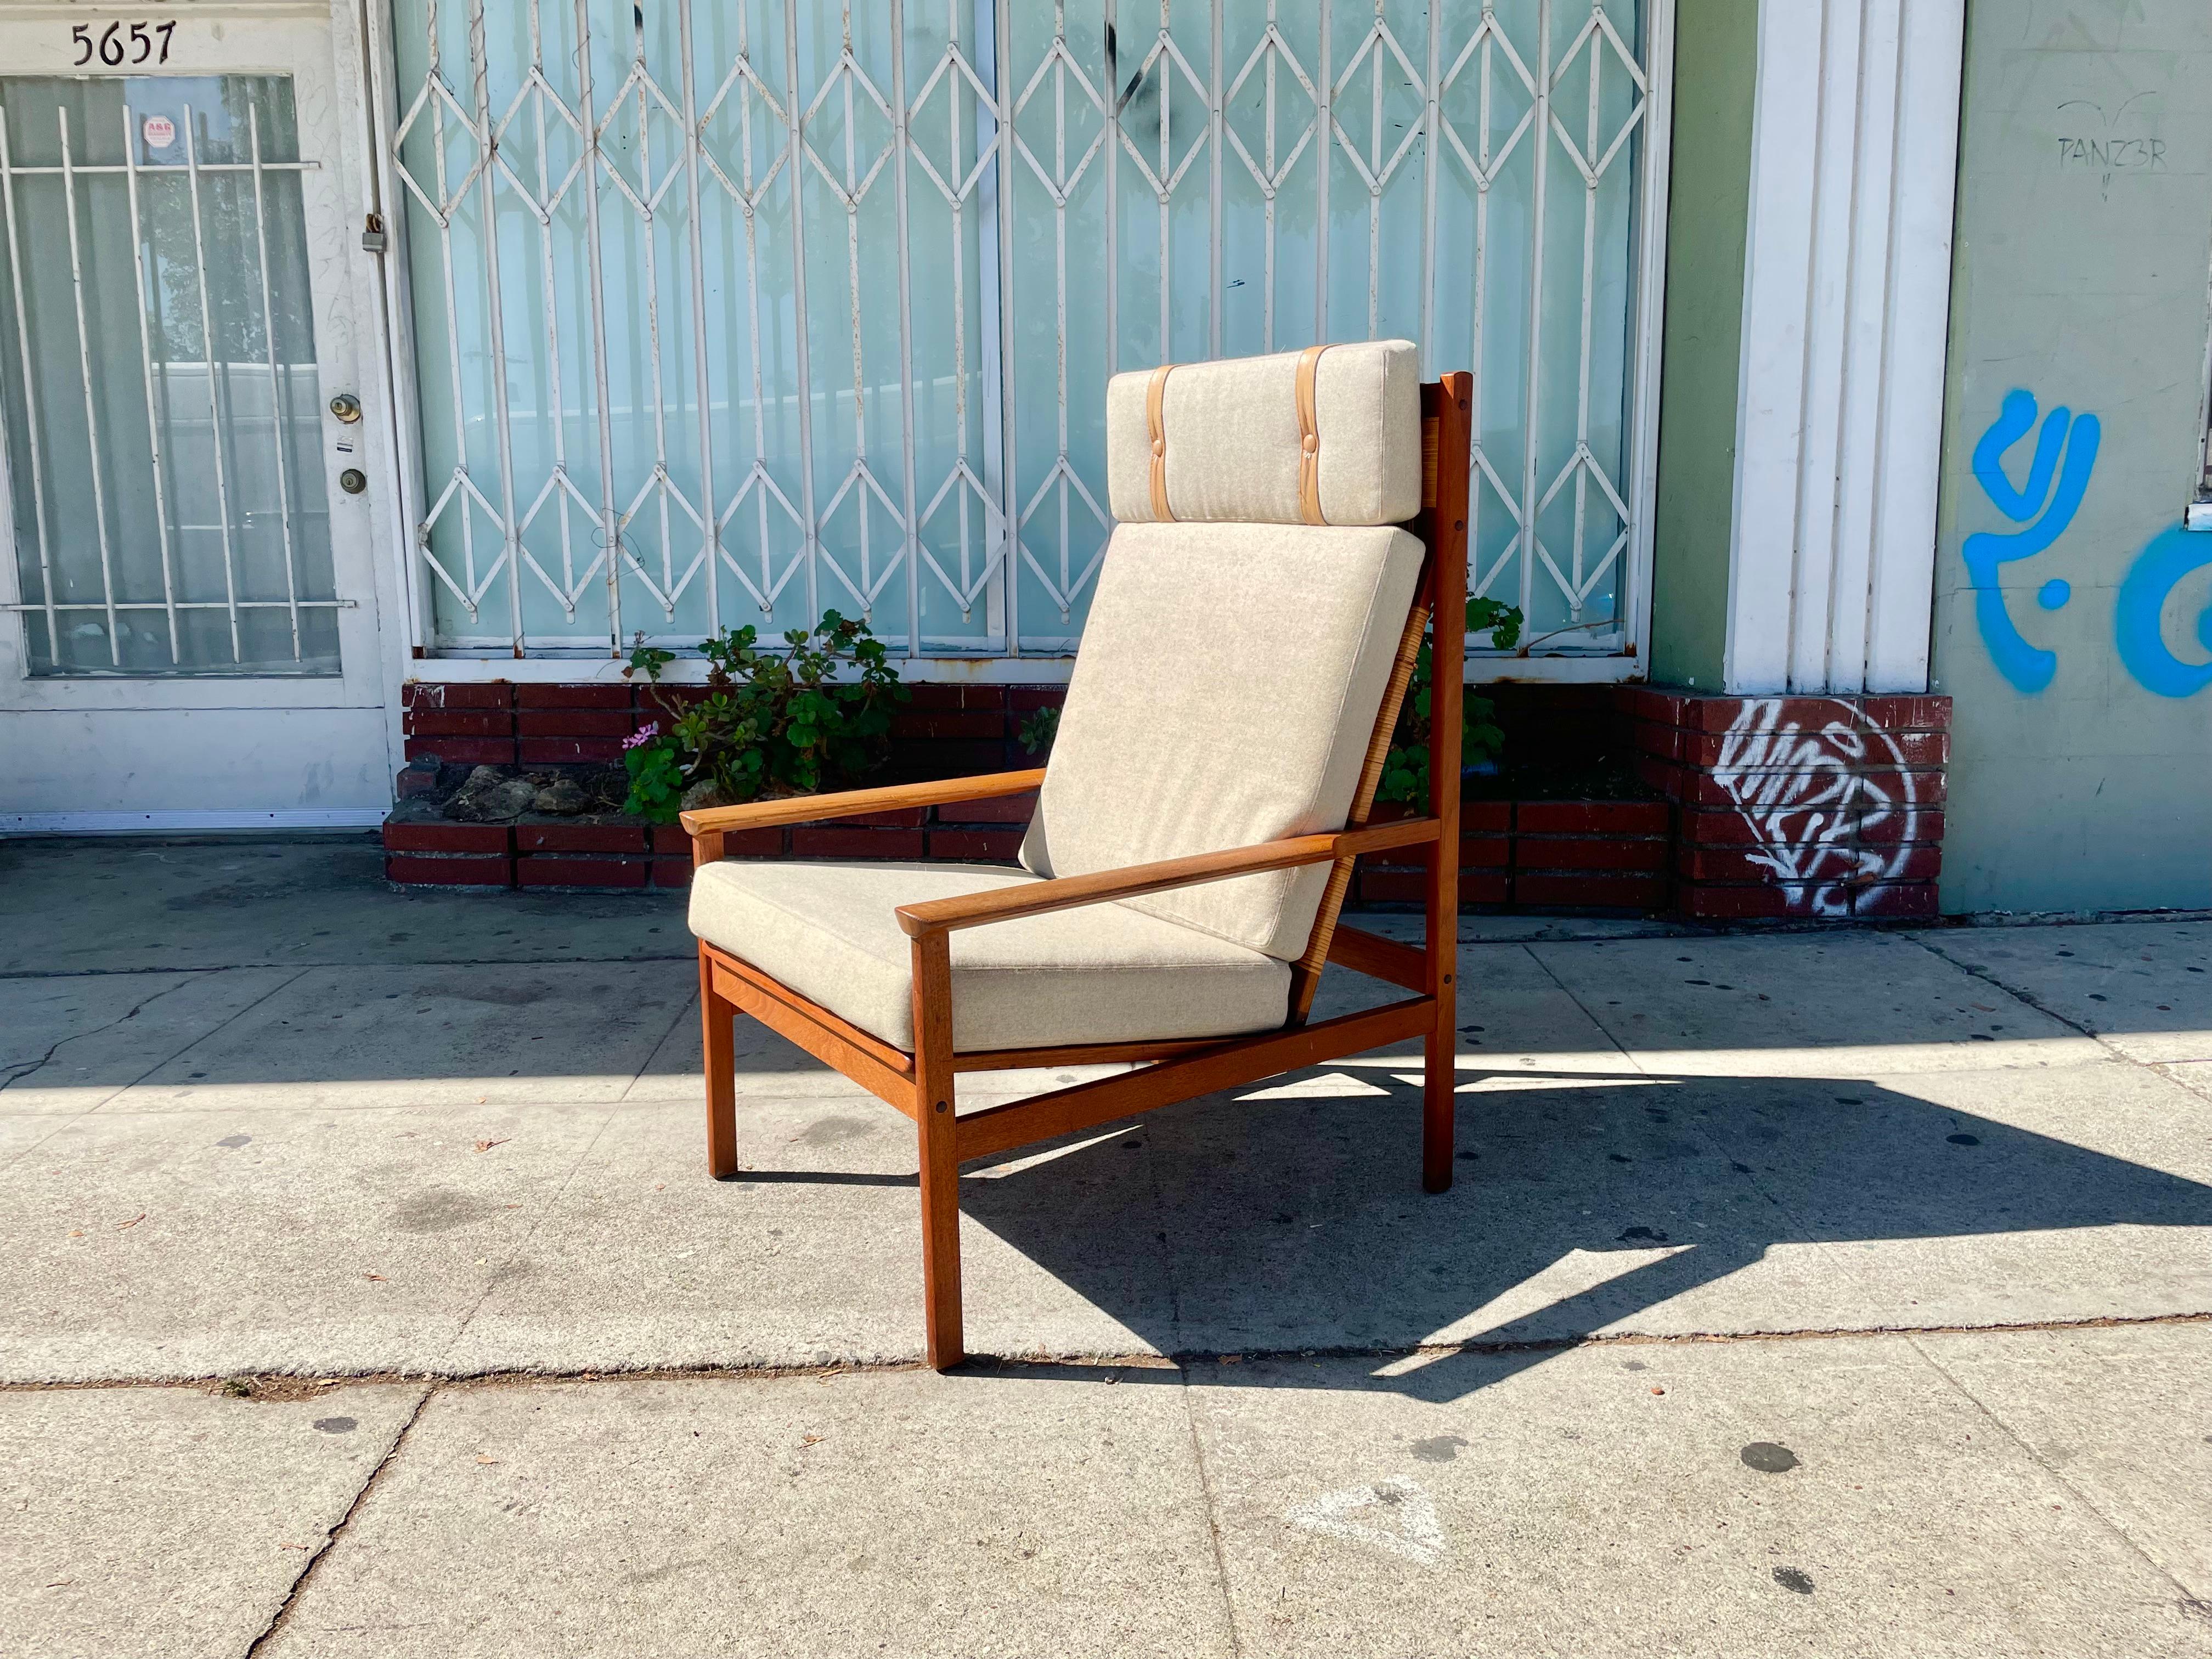 Danish modern teak lounge chair designed by Hans Olsen for Juul Kristensen in Denmark circa 1960s. This beautiful high-back chair features a teak frame with a cane-back finish, providing comfort and style guaranteed to draw anyone's attention. You